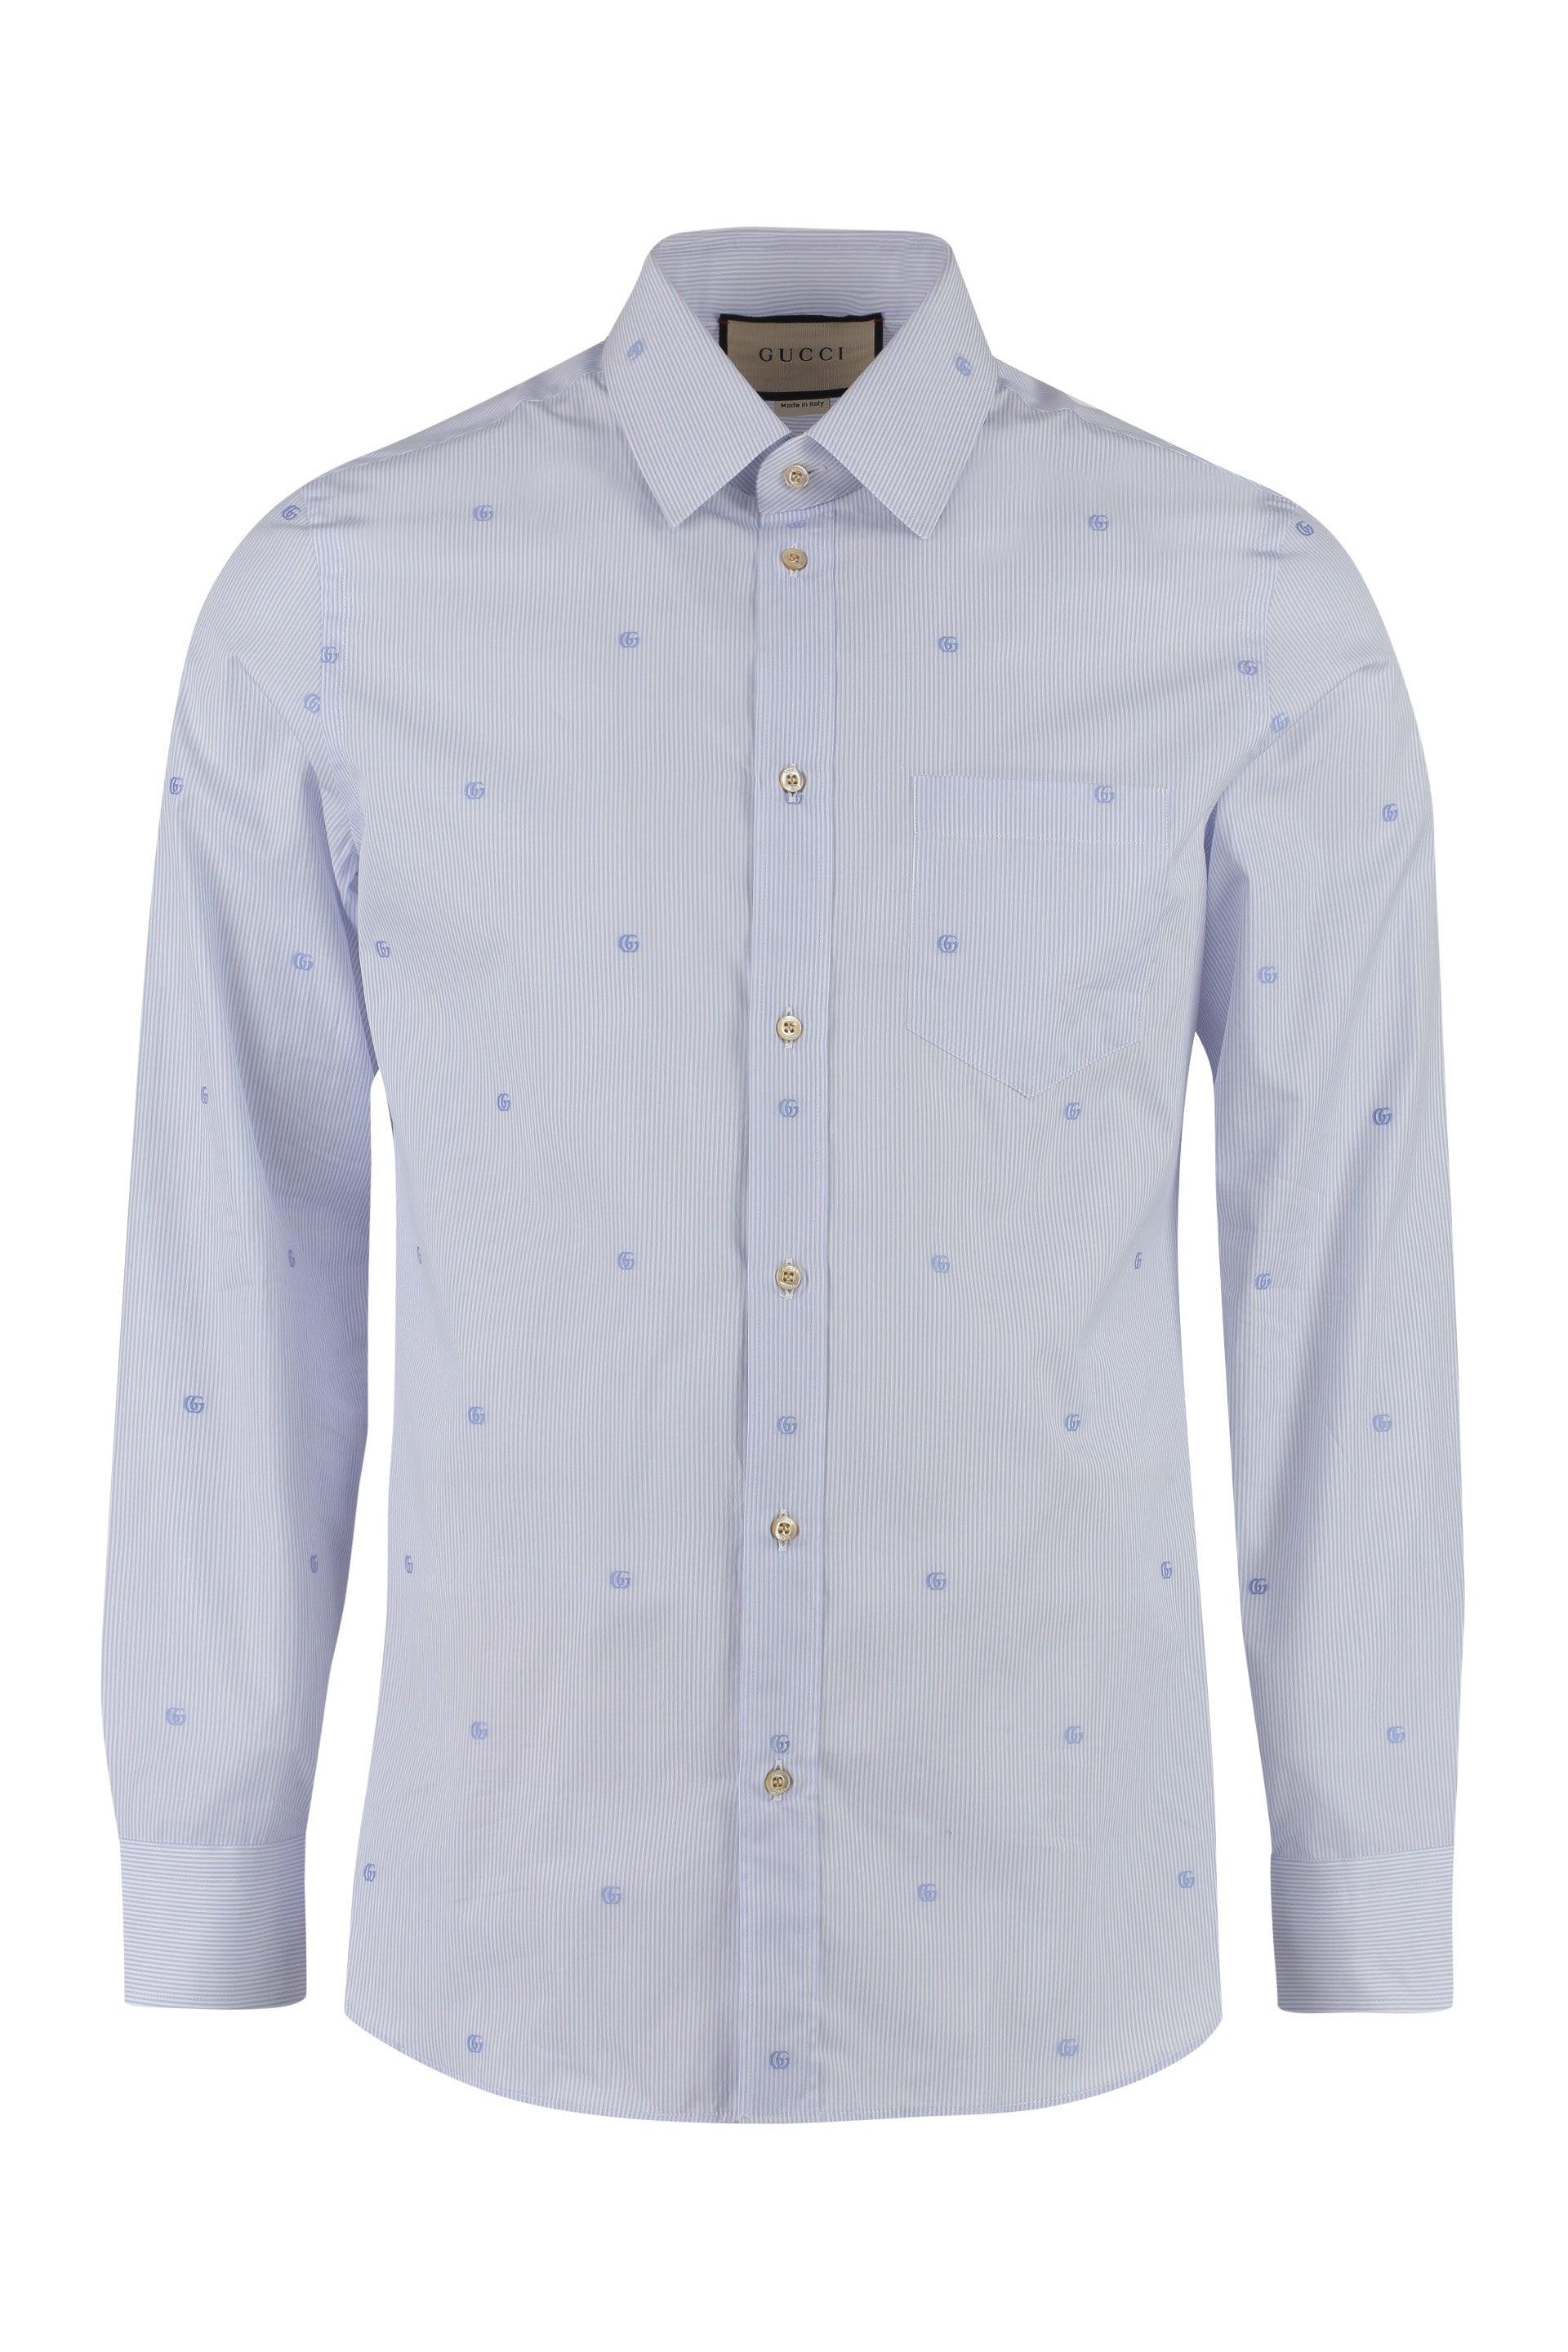 Gucci Cotton Poplin Shirt with Double G, Size 18, Blue, Ready-to-wear